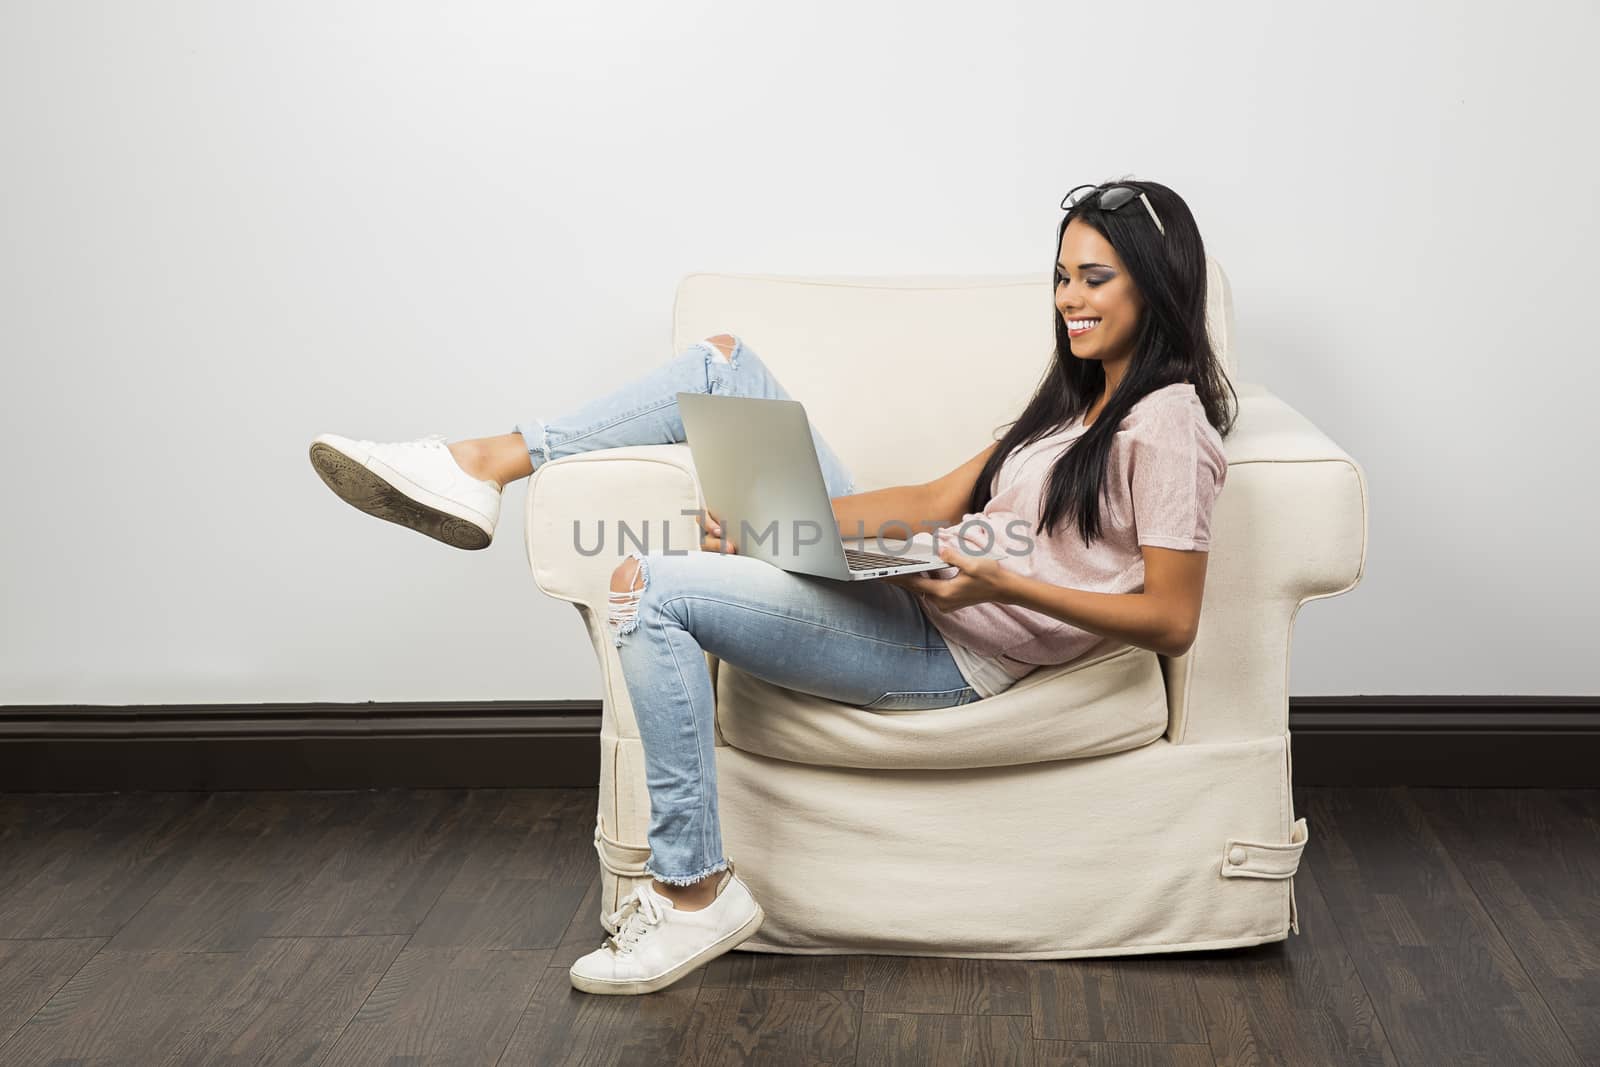 twenty something woman working on a grey laptop, with one leg up on the arm of the couch